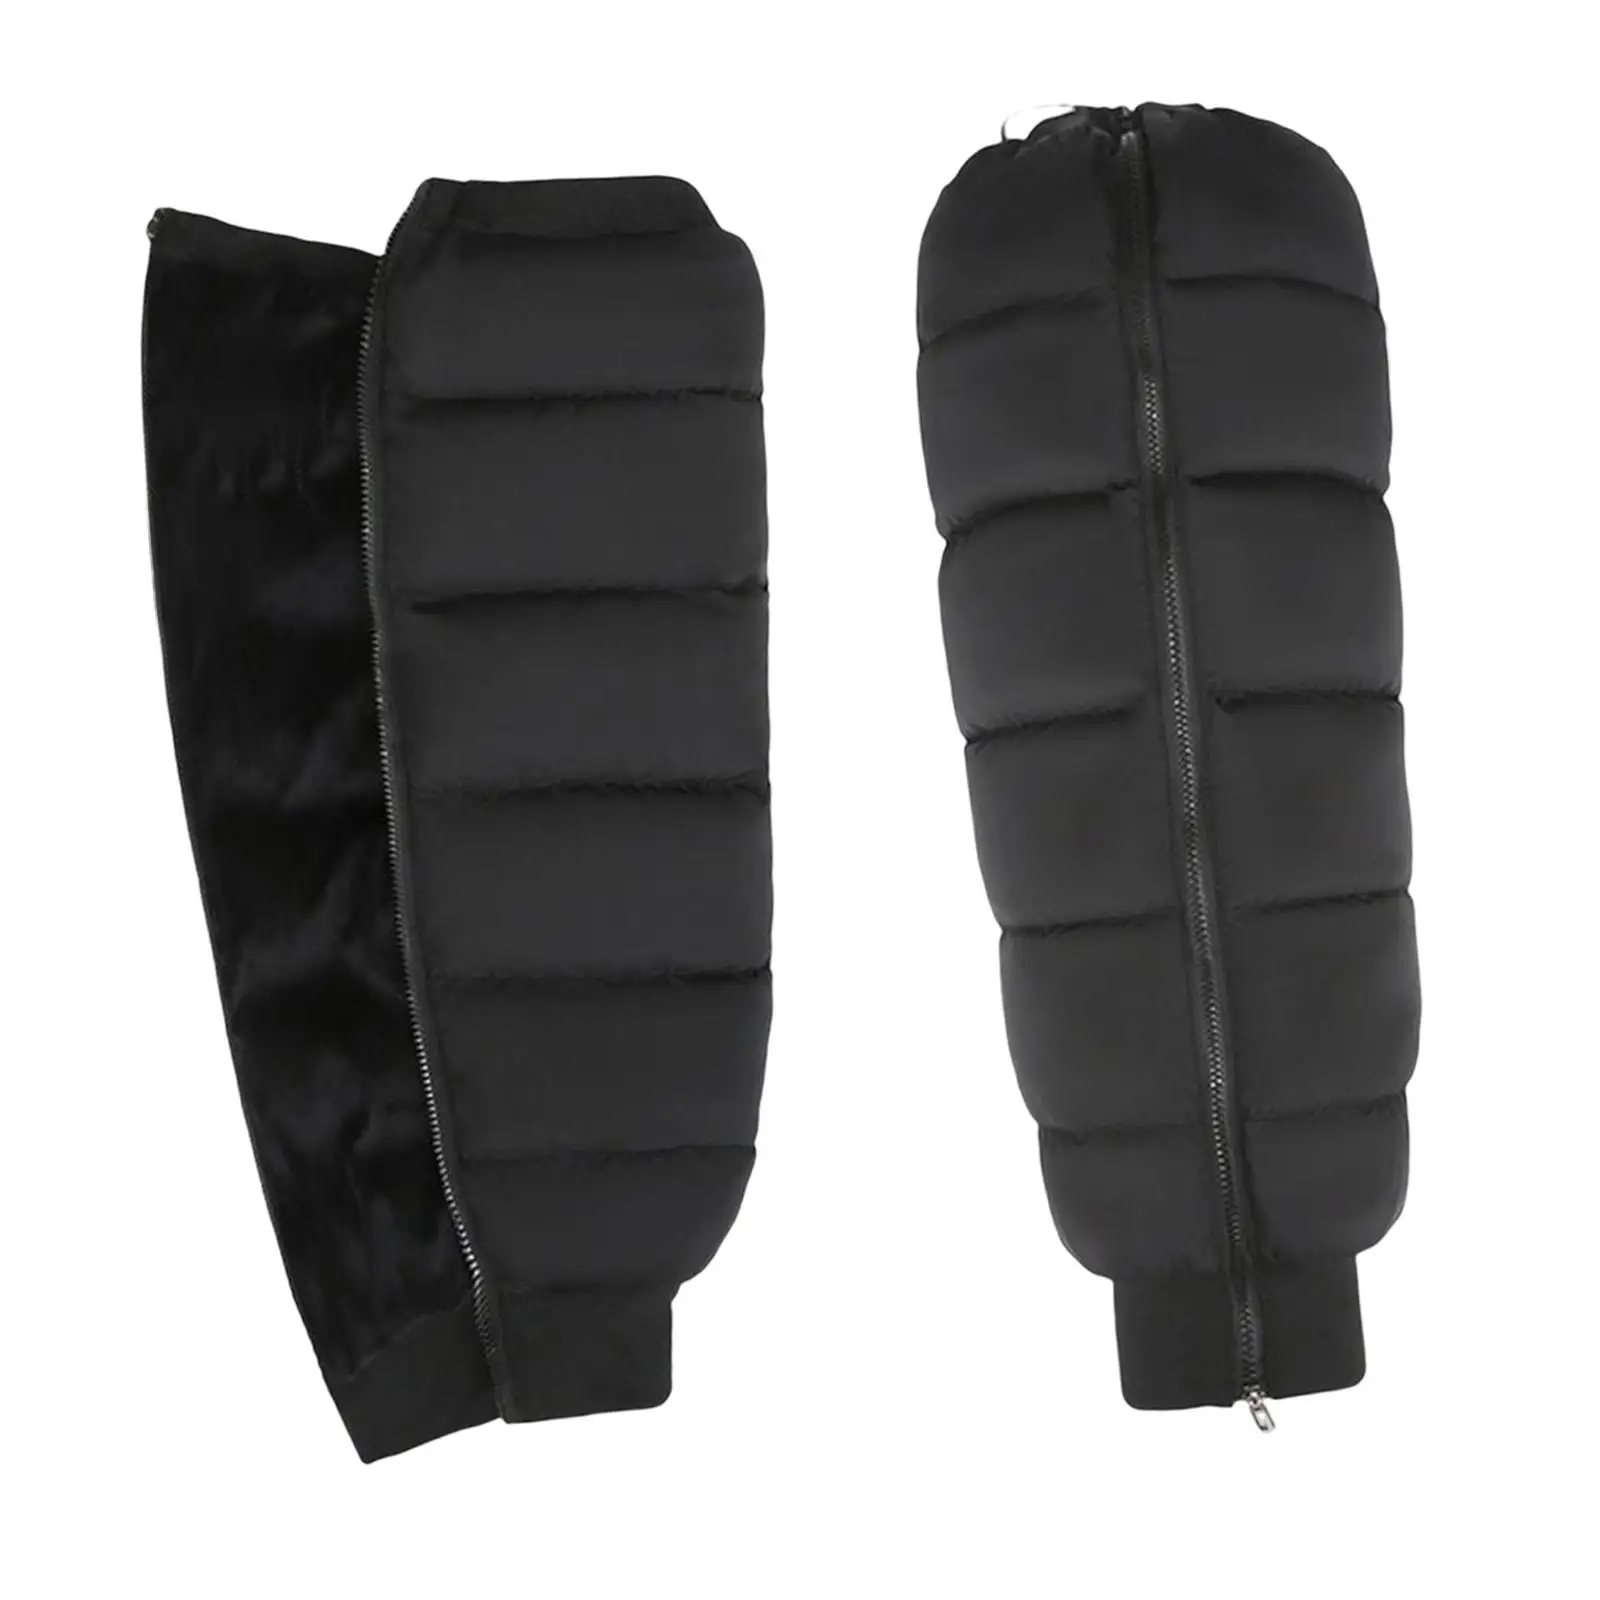 1 Pair Winter Cycling Knee Pads Protective Gear Black Warmer Windproof Men and Women Leg Sleeve for Cold Winter Riding Skiing